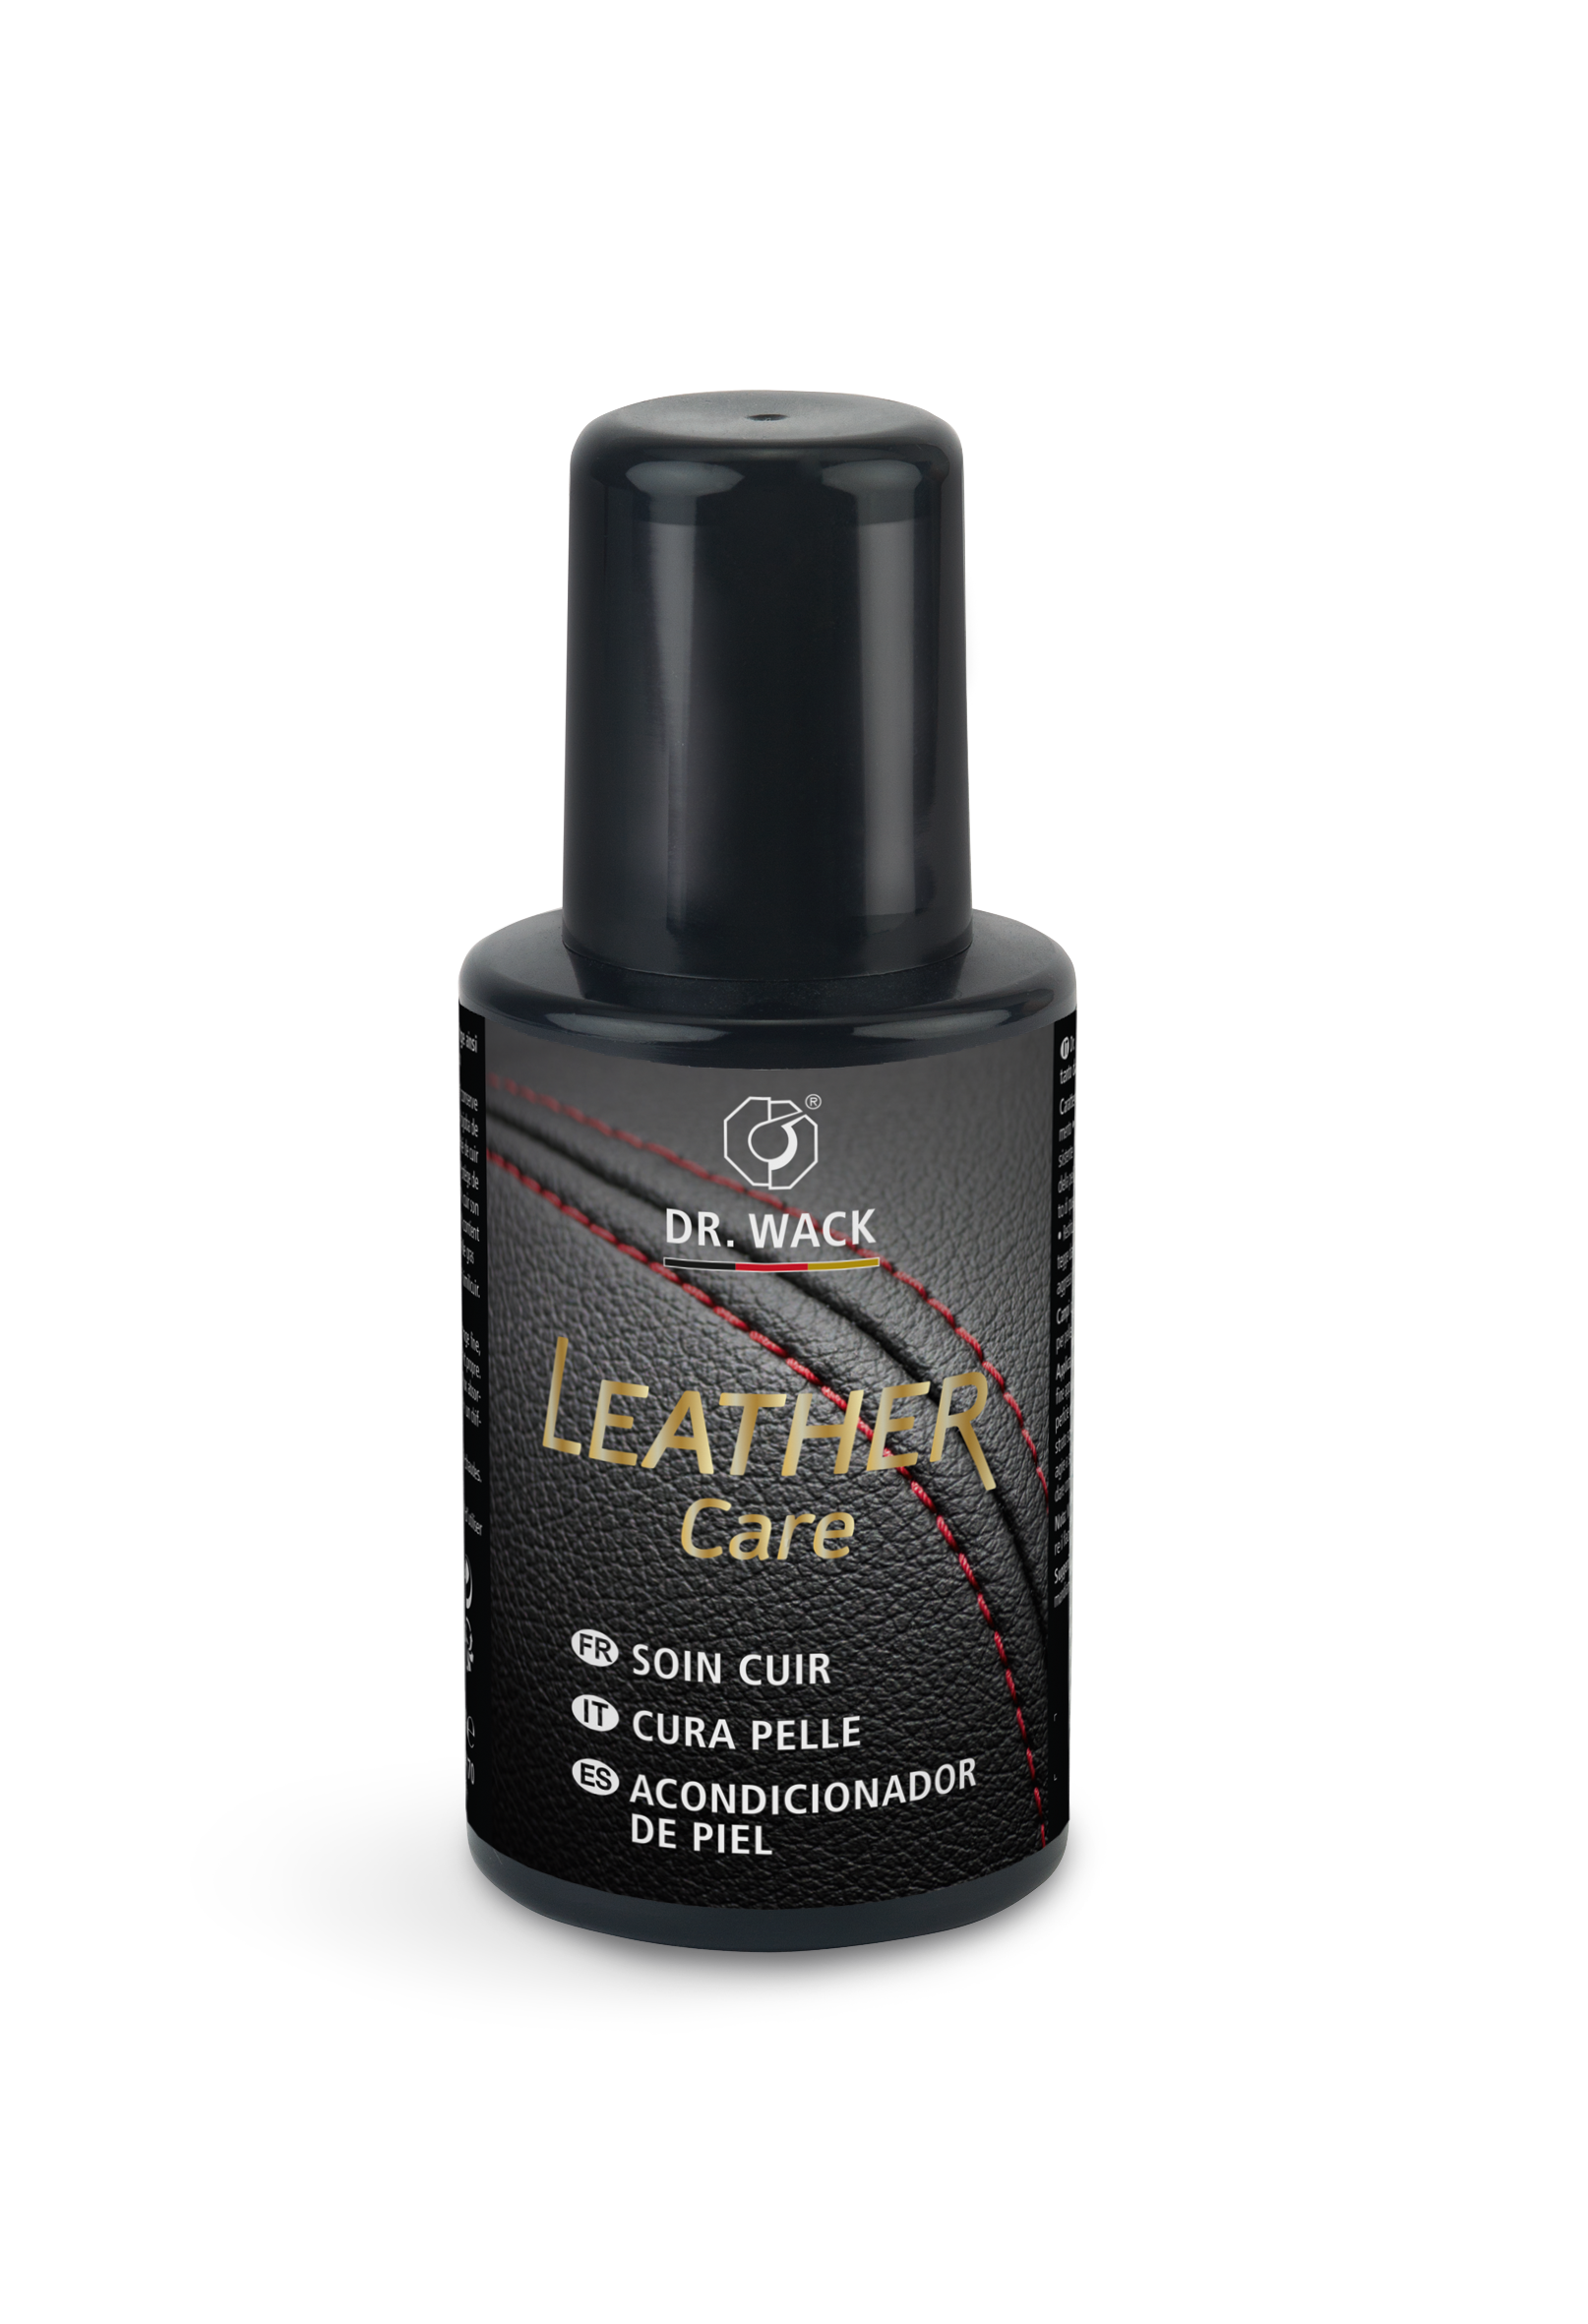 Dr. Wack Leather Care